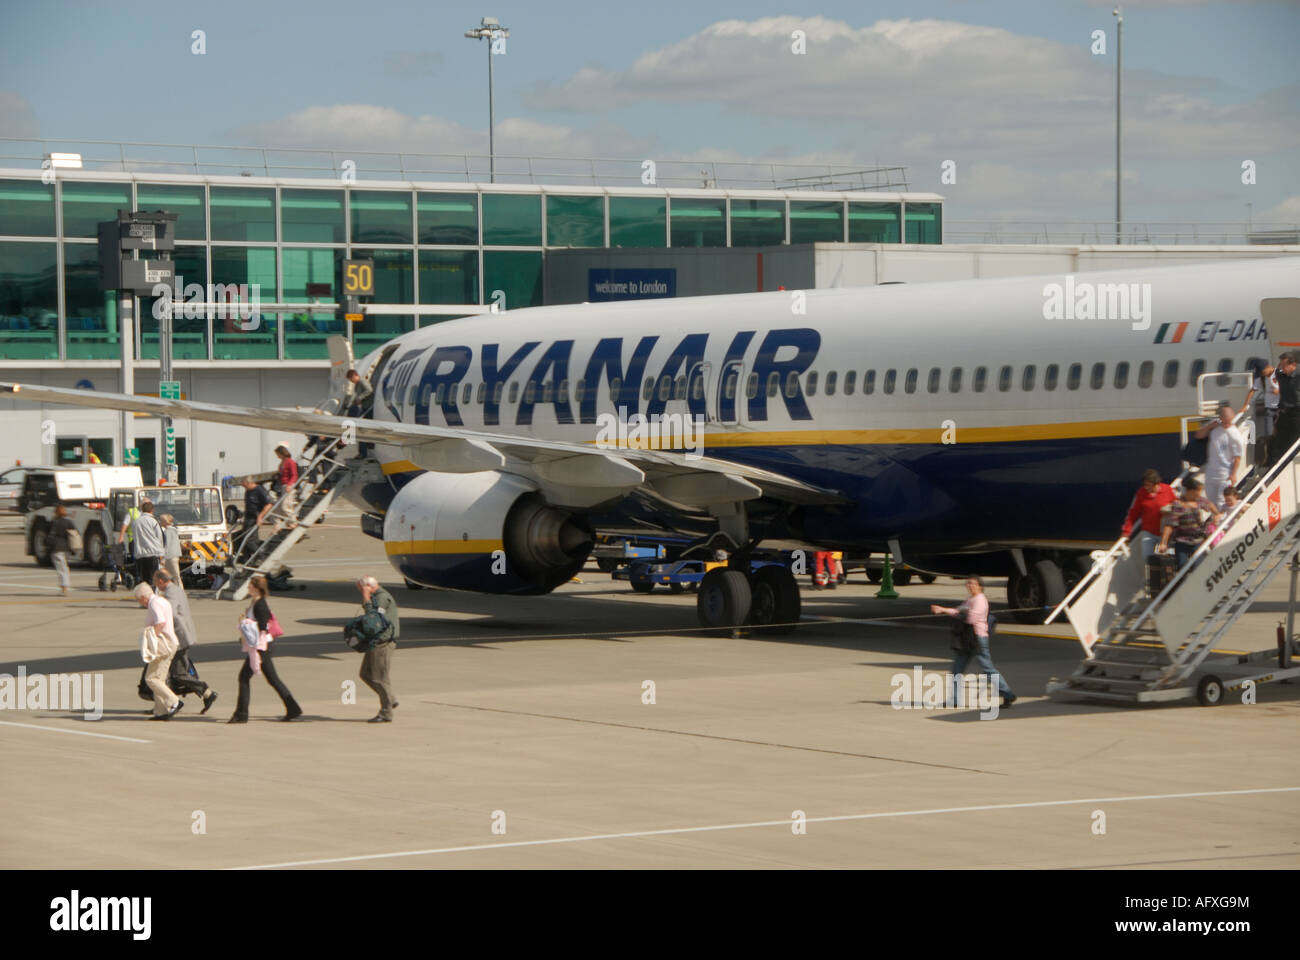 Ryan Air Stanstead Airport England. passengers disembark from a plane that has just landed Stock Photo